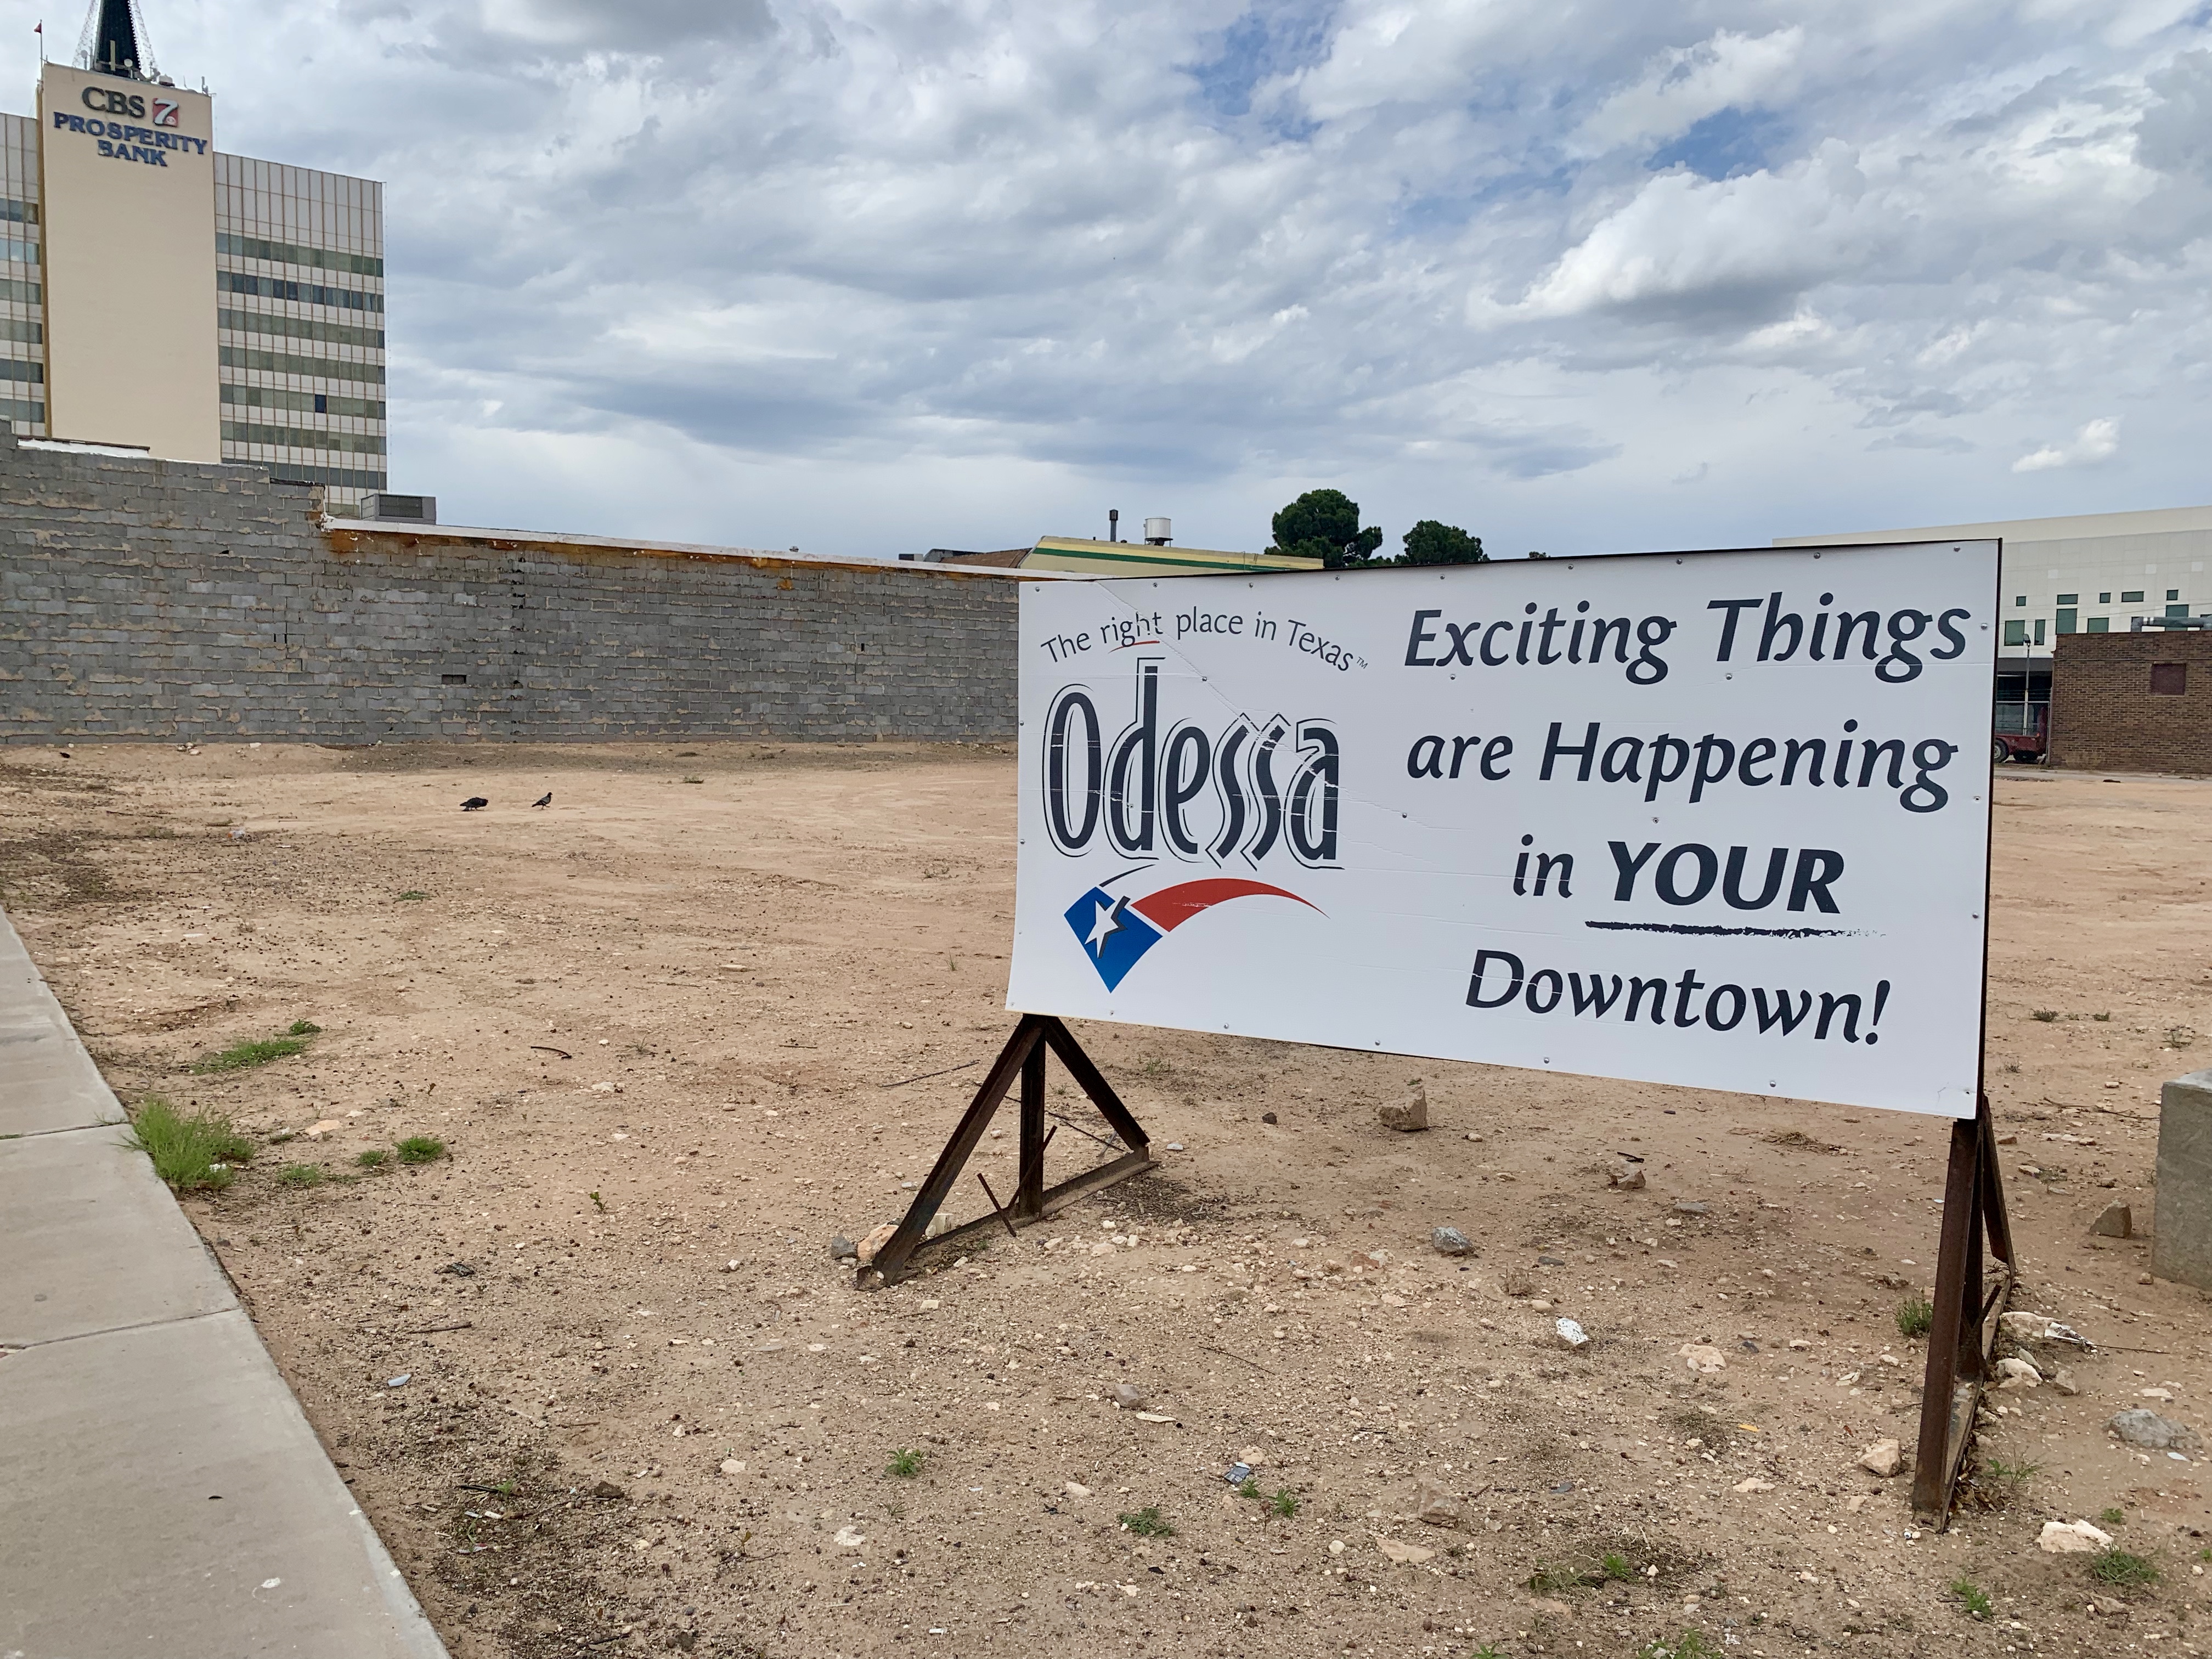 Are exciting things happening in downtown Odessa, Texas? Or has the money run out?